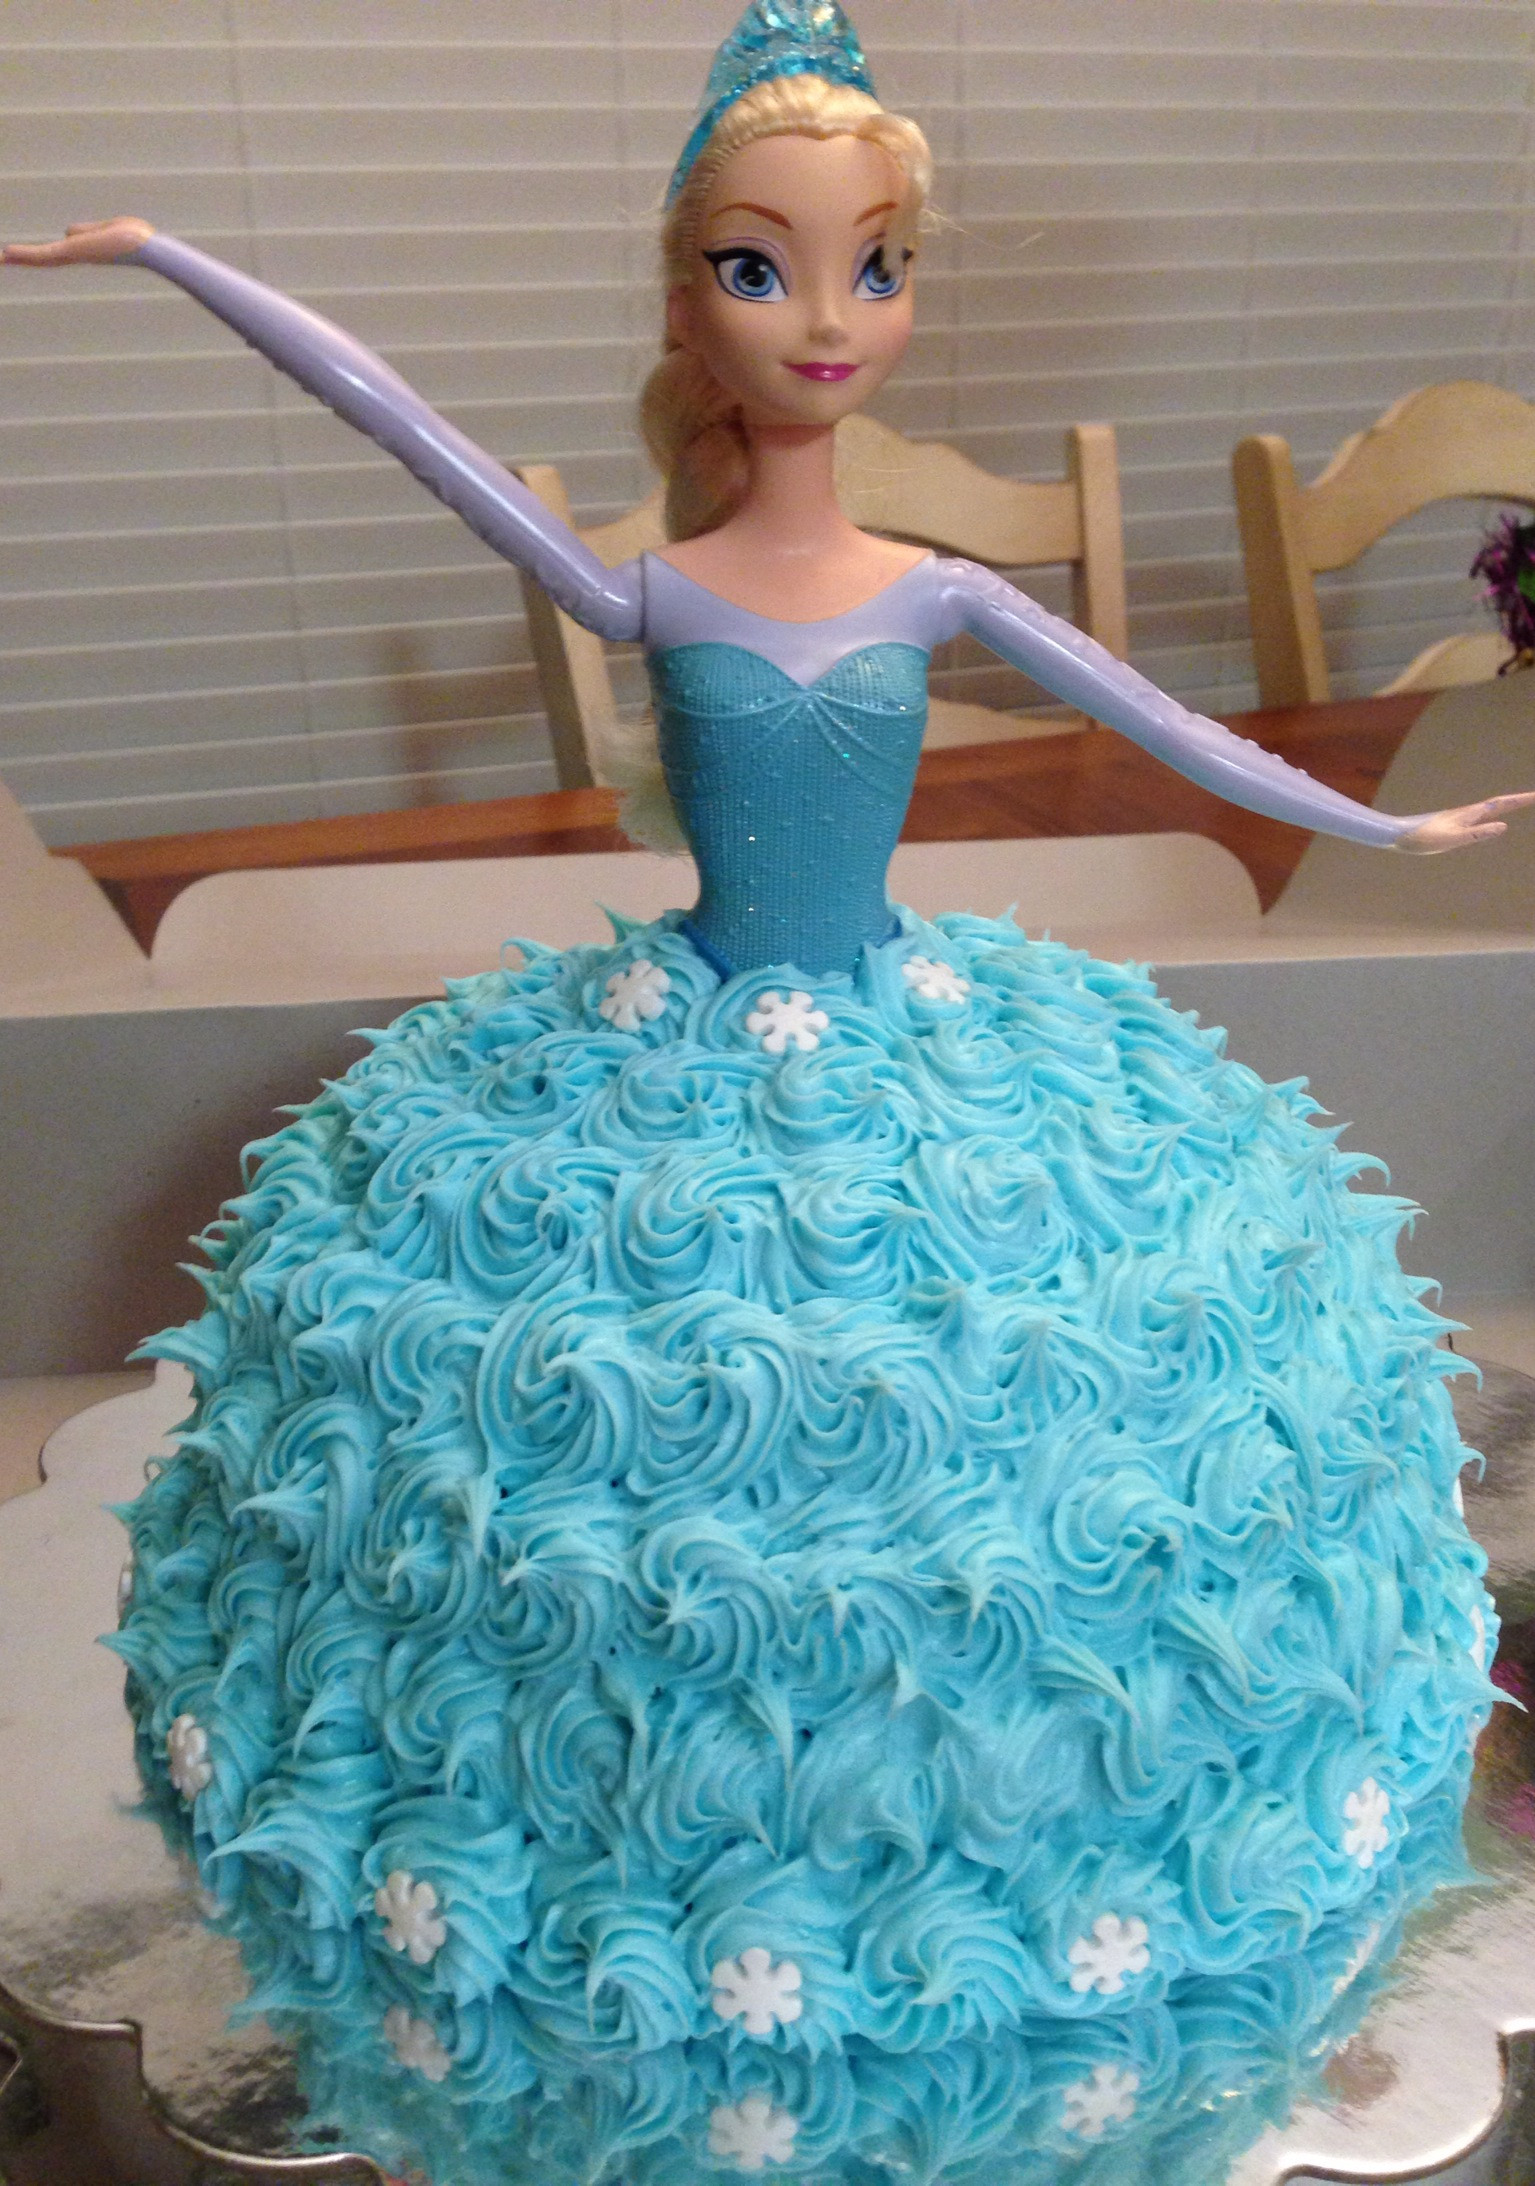 Frozen Birthday Cakes Ideas
 Easy Frozen themed cakes that anyone can make